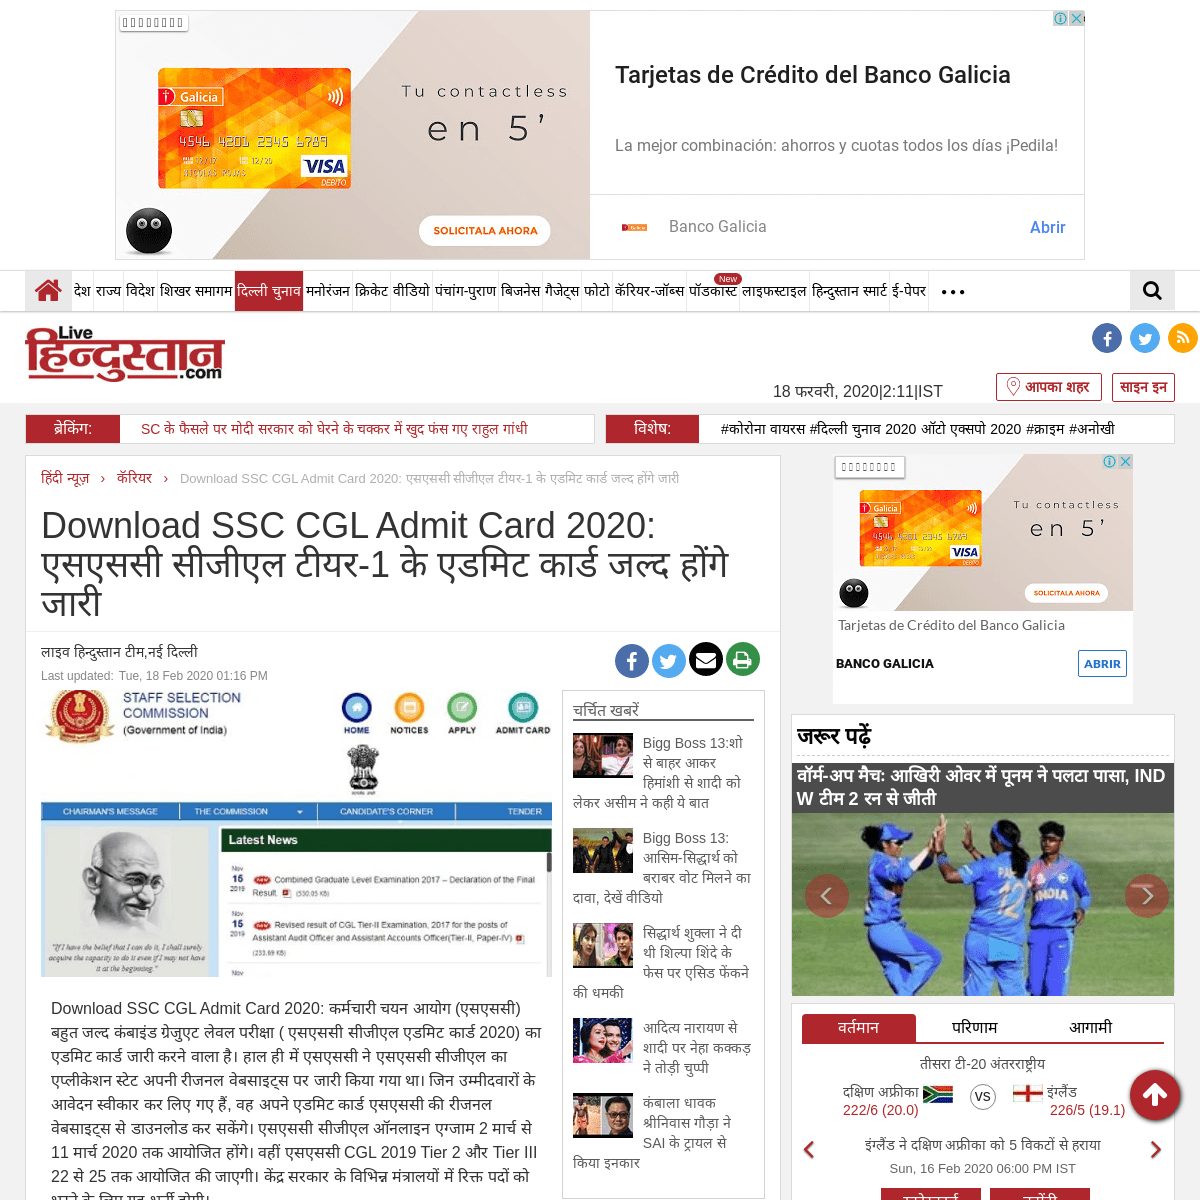 A complete backup of www.livehindustan.com/career/story-download-ssc-cgl-admit-card-2020-ssc-cgl-tier-1-exam-call-letter-to-be-r